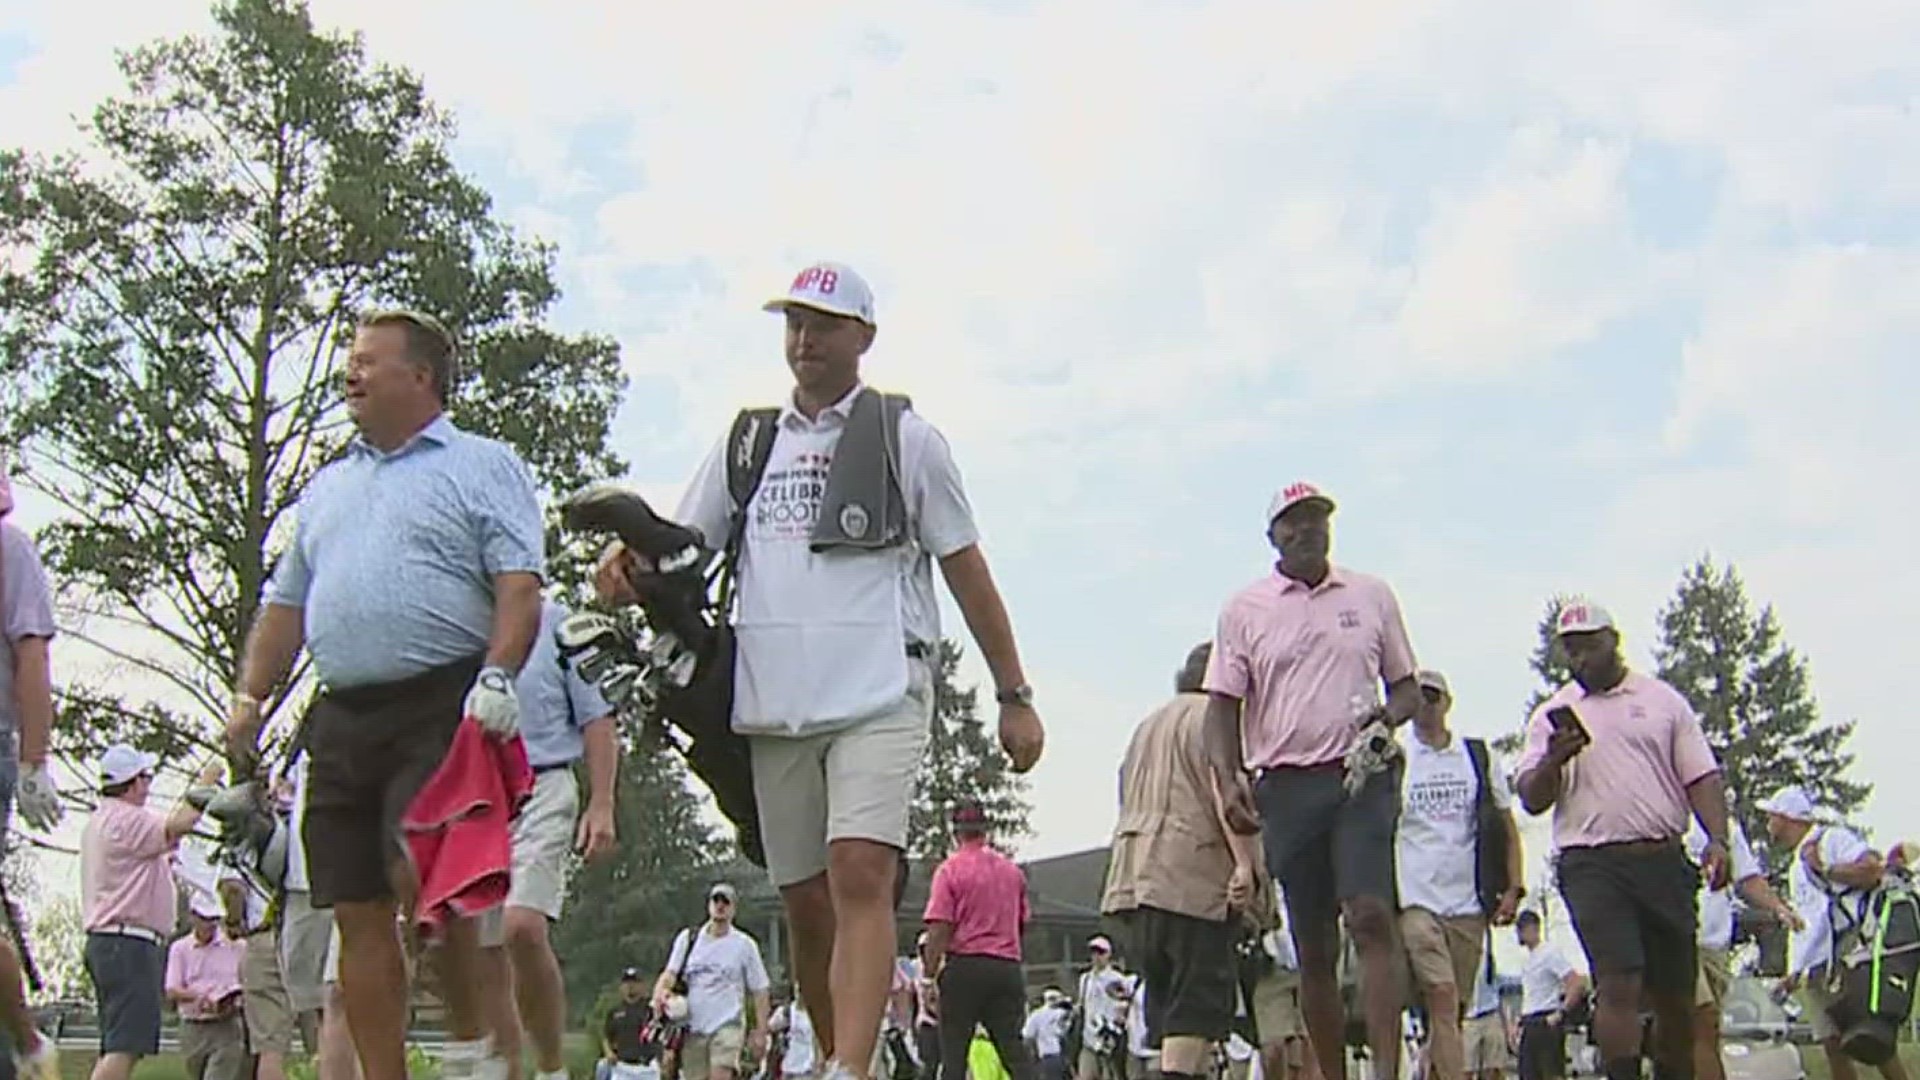 Sports celebrities come together to raise money to fight breast cancer